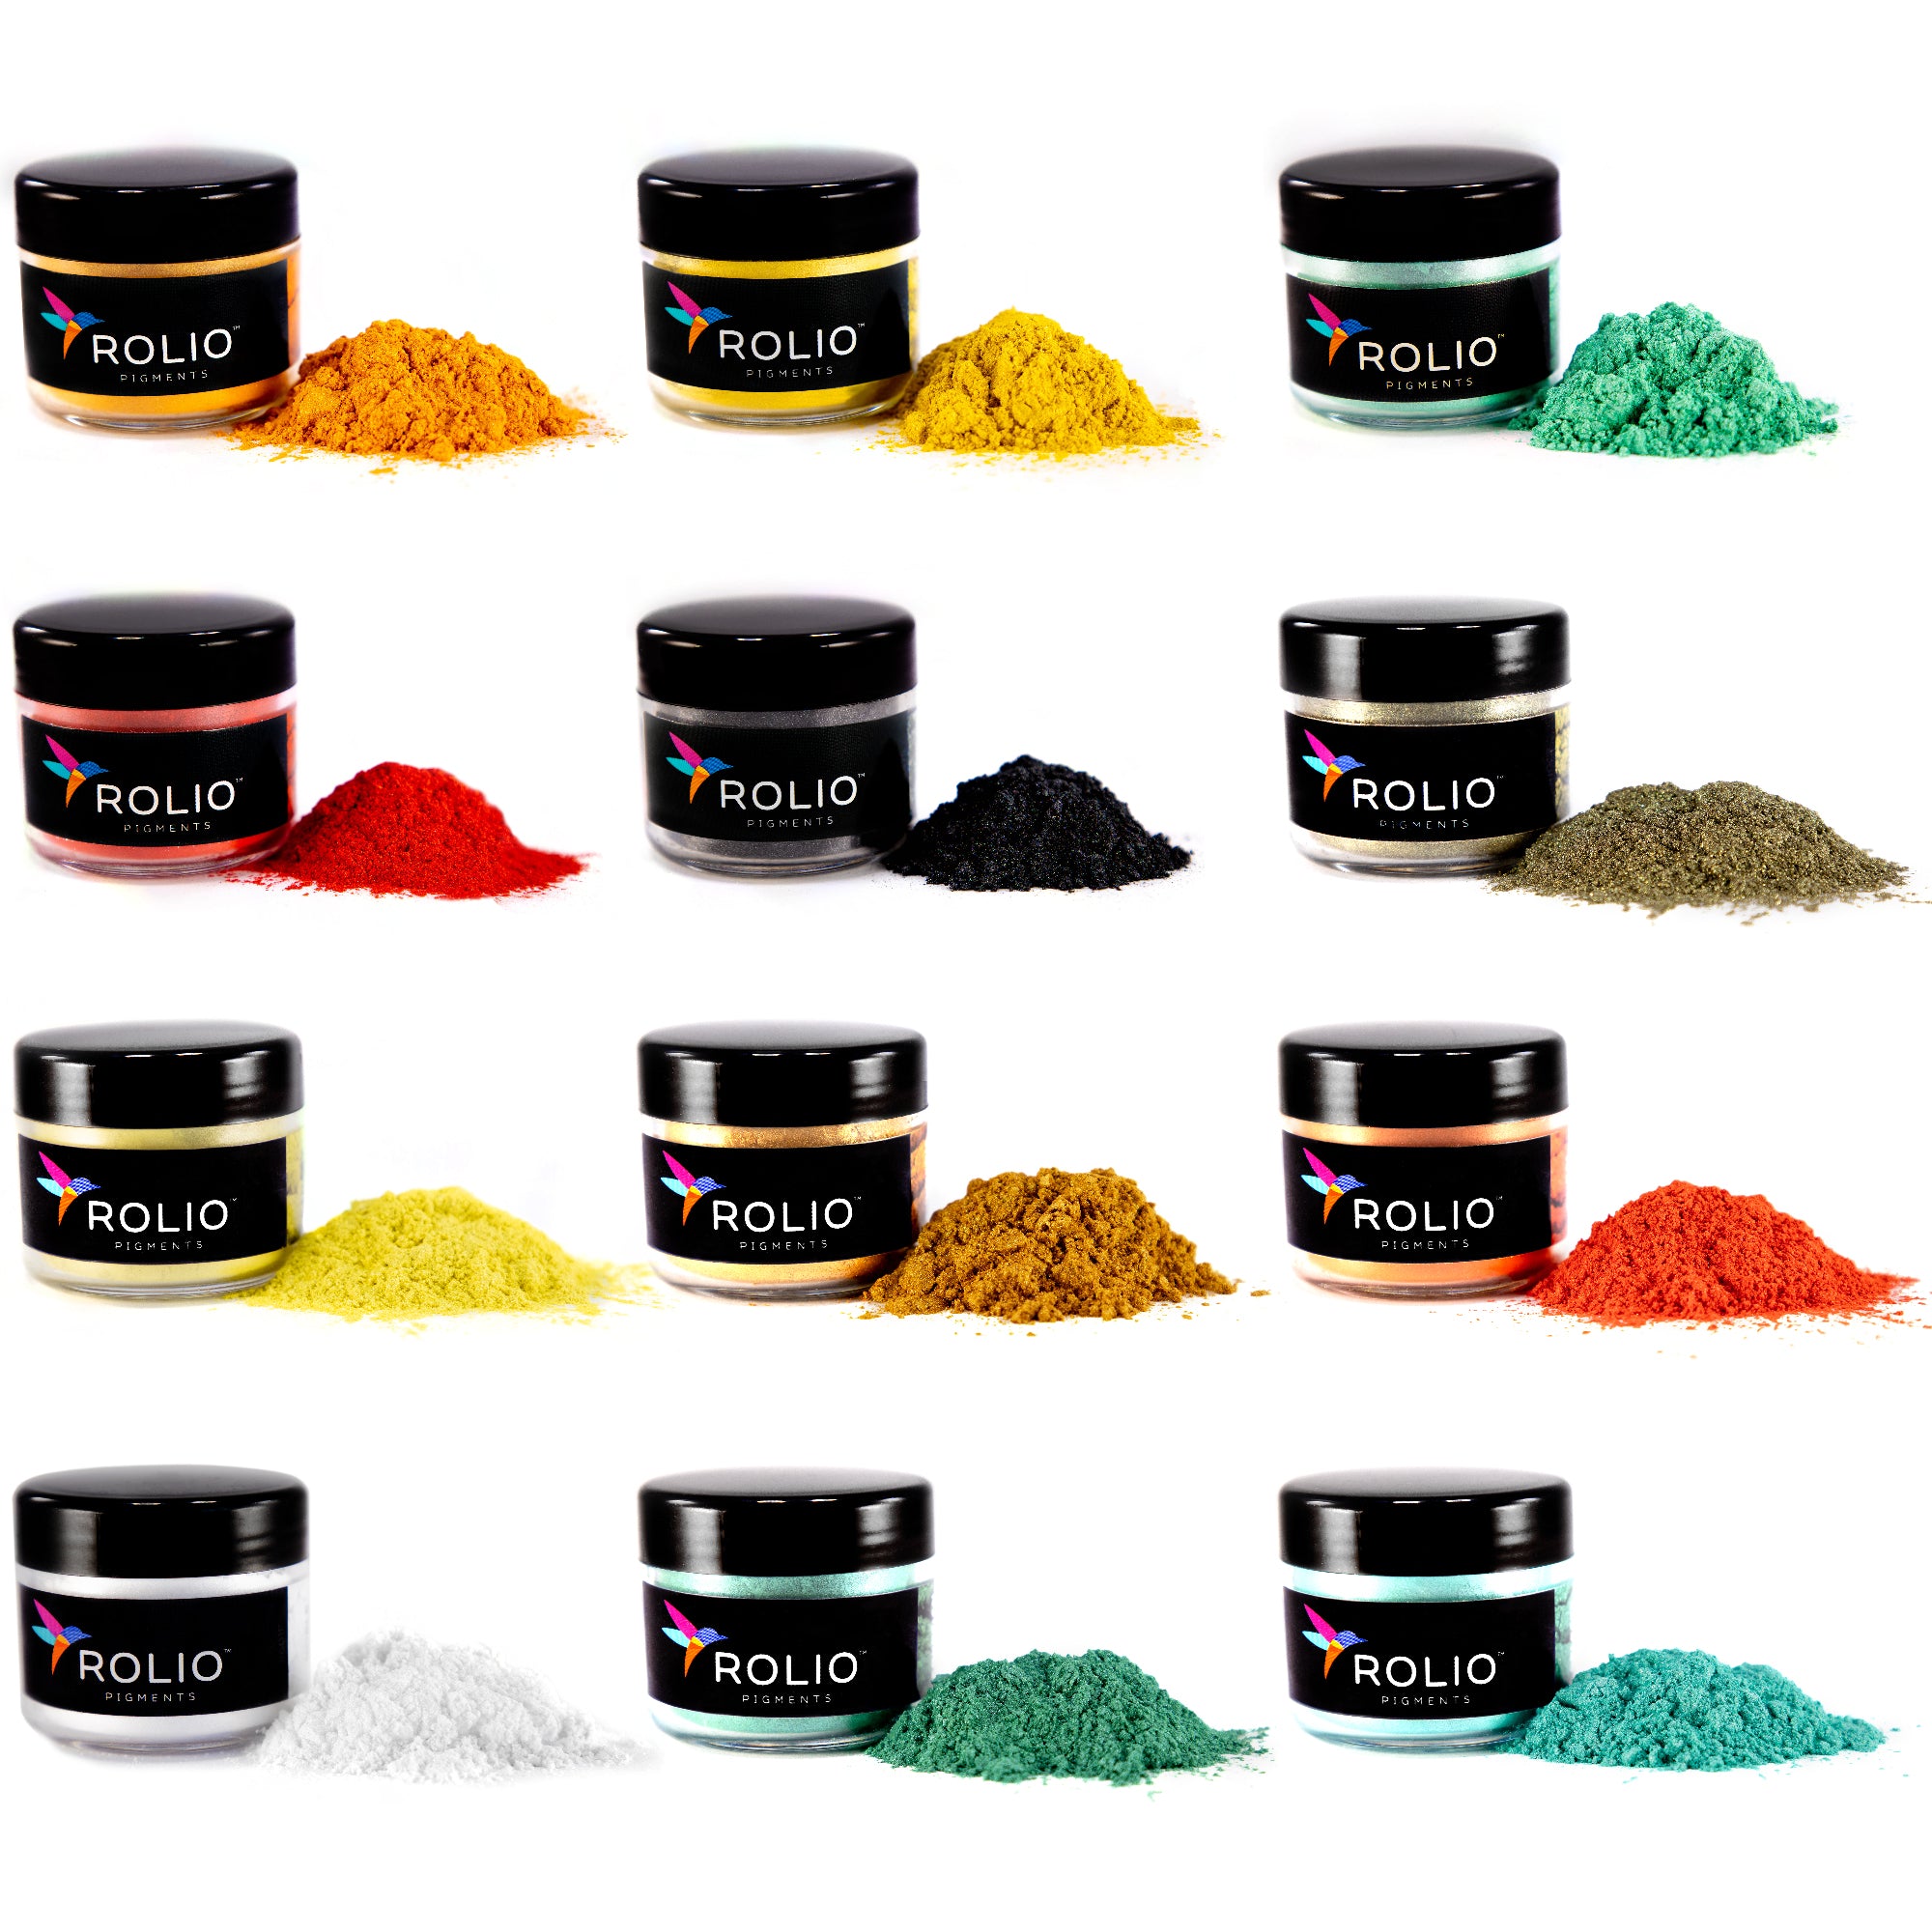 Mica Powder 32 Pearlescent Pigments Set, for Lip Gloss, Makeup, Soap, Bath Bomb Dye, Nail Polish, Painting, Epoxy Resin, Craft Projects